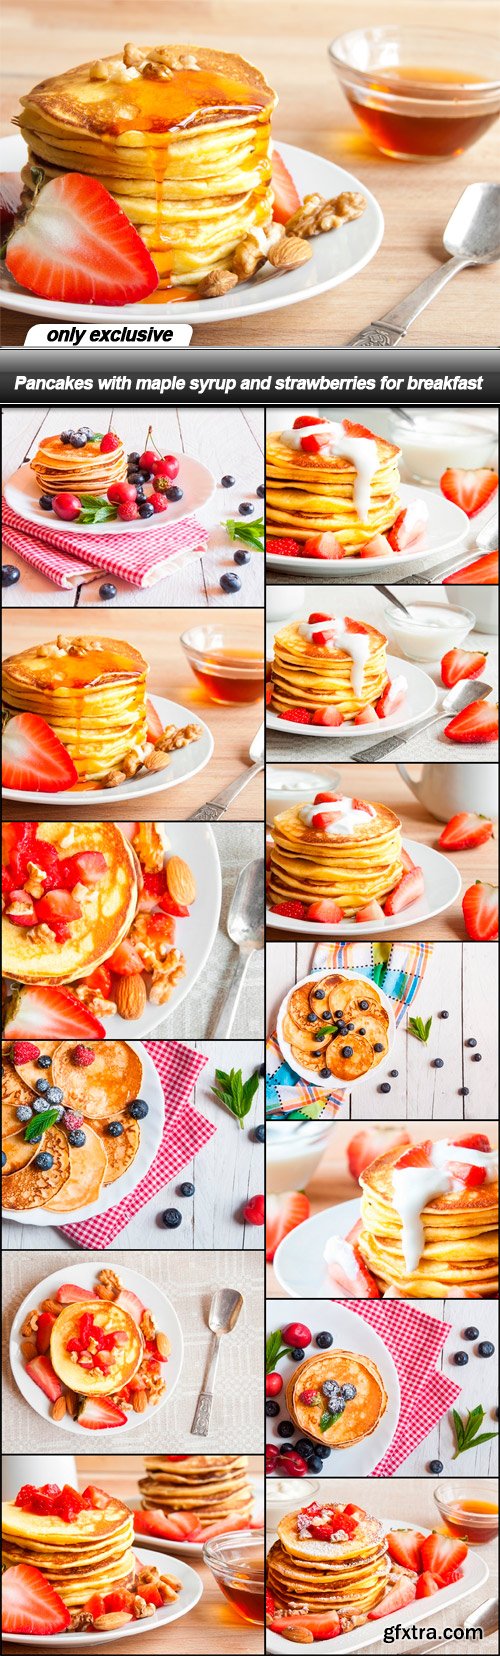 Pancakes with maple syrup and strawberries for breakfast - 13 UHQ JPEG